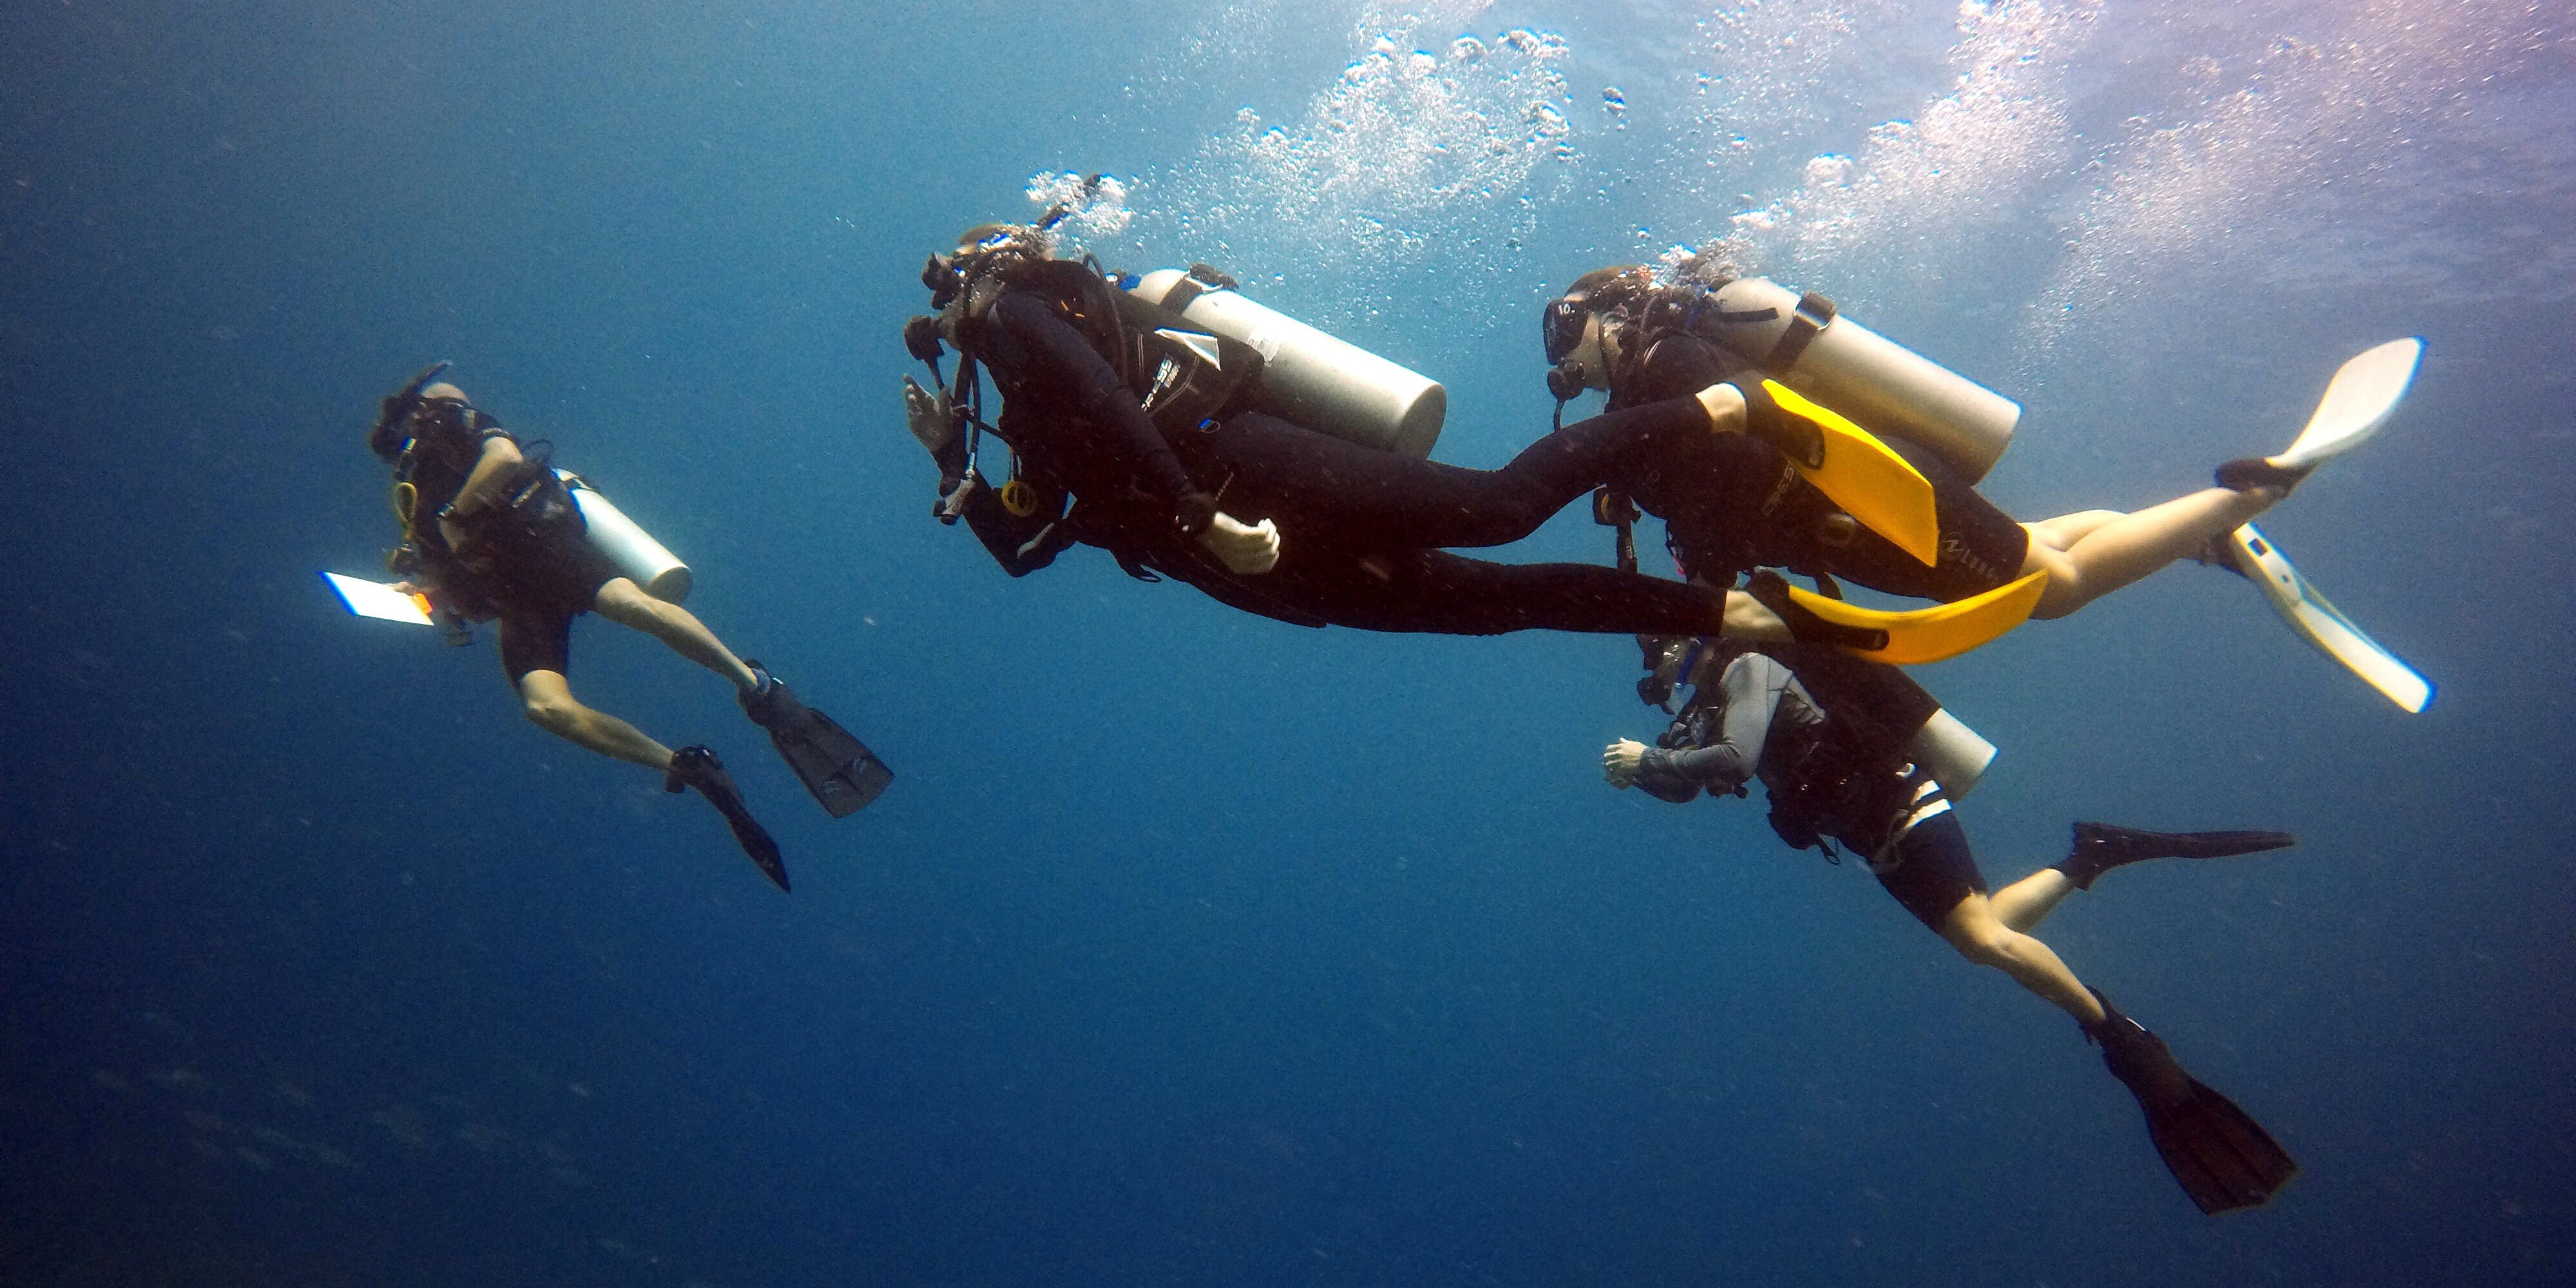 GVI participants work towards their PADI dive certification while collecting data on marine life in Seychelles.